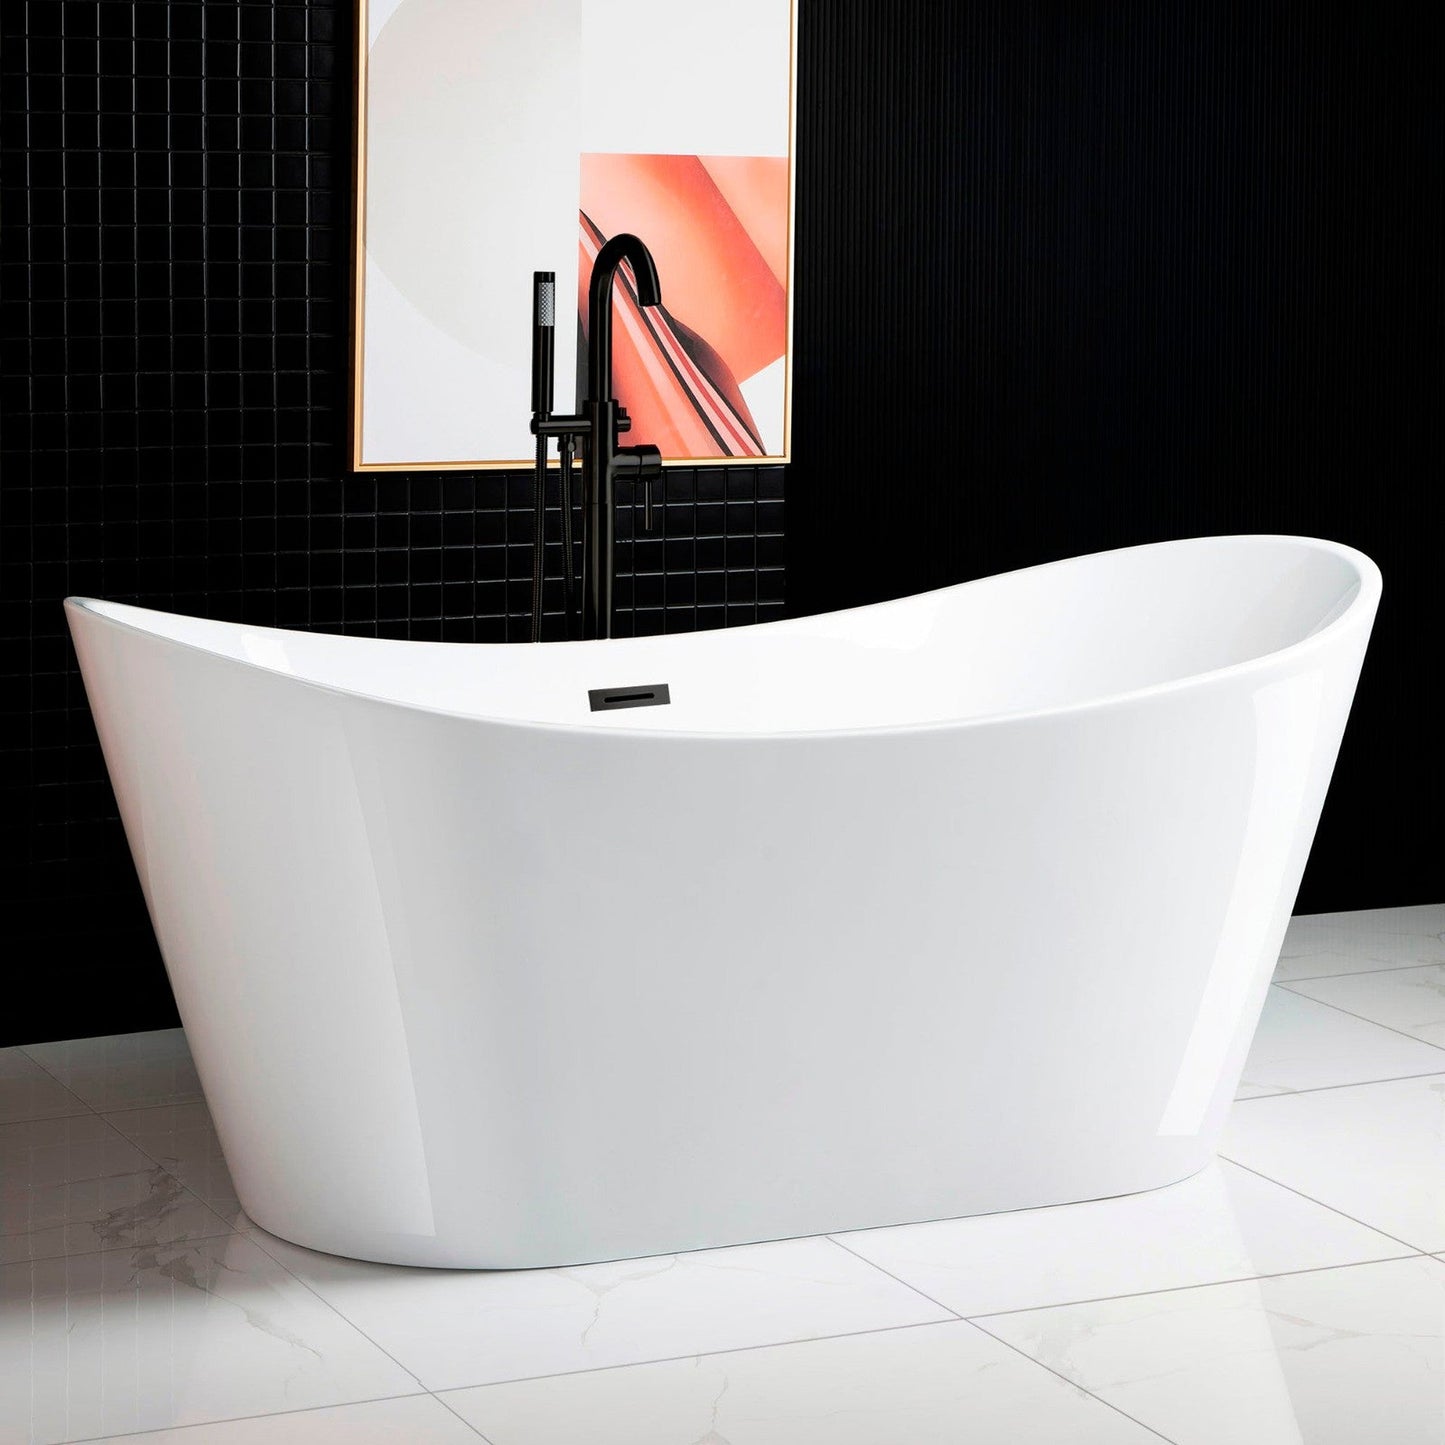 WoodBridge B0010 67" White Acrylic Freestanding Contemporary Soaking Bathtub With Matte Black Drain, Overflow, F0072MBDR Tub Filler and Caddy Tray